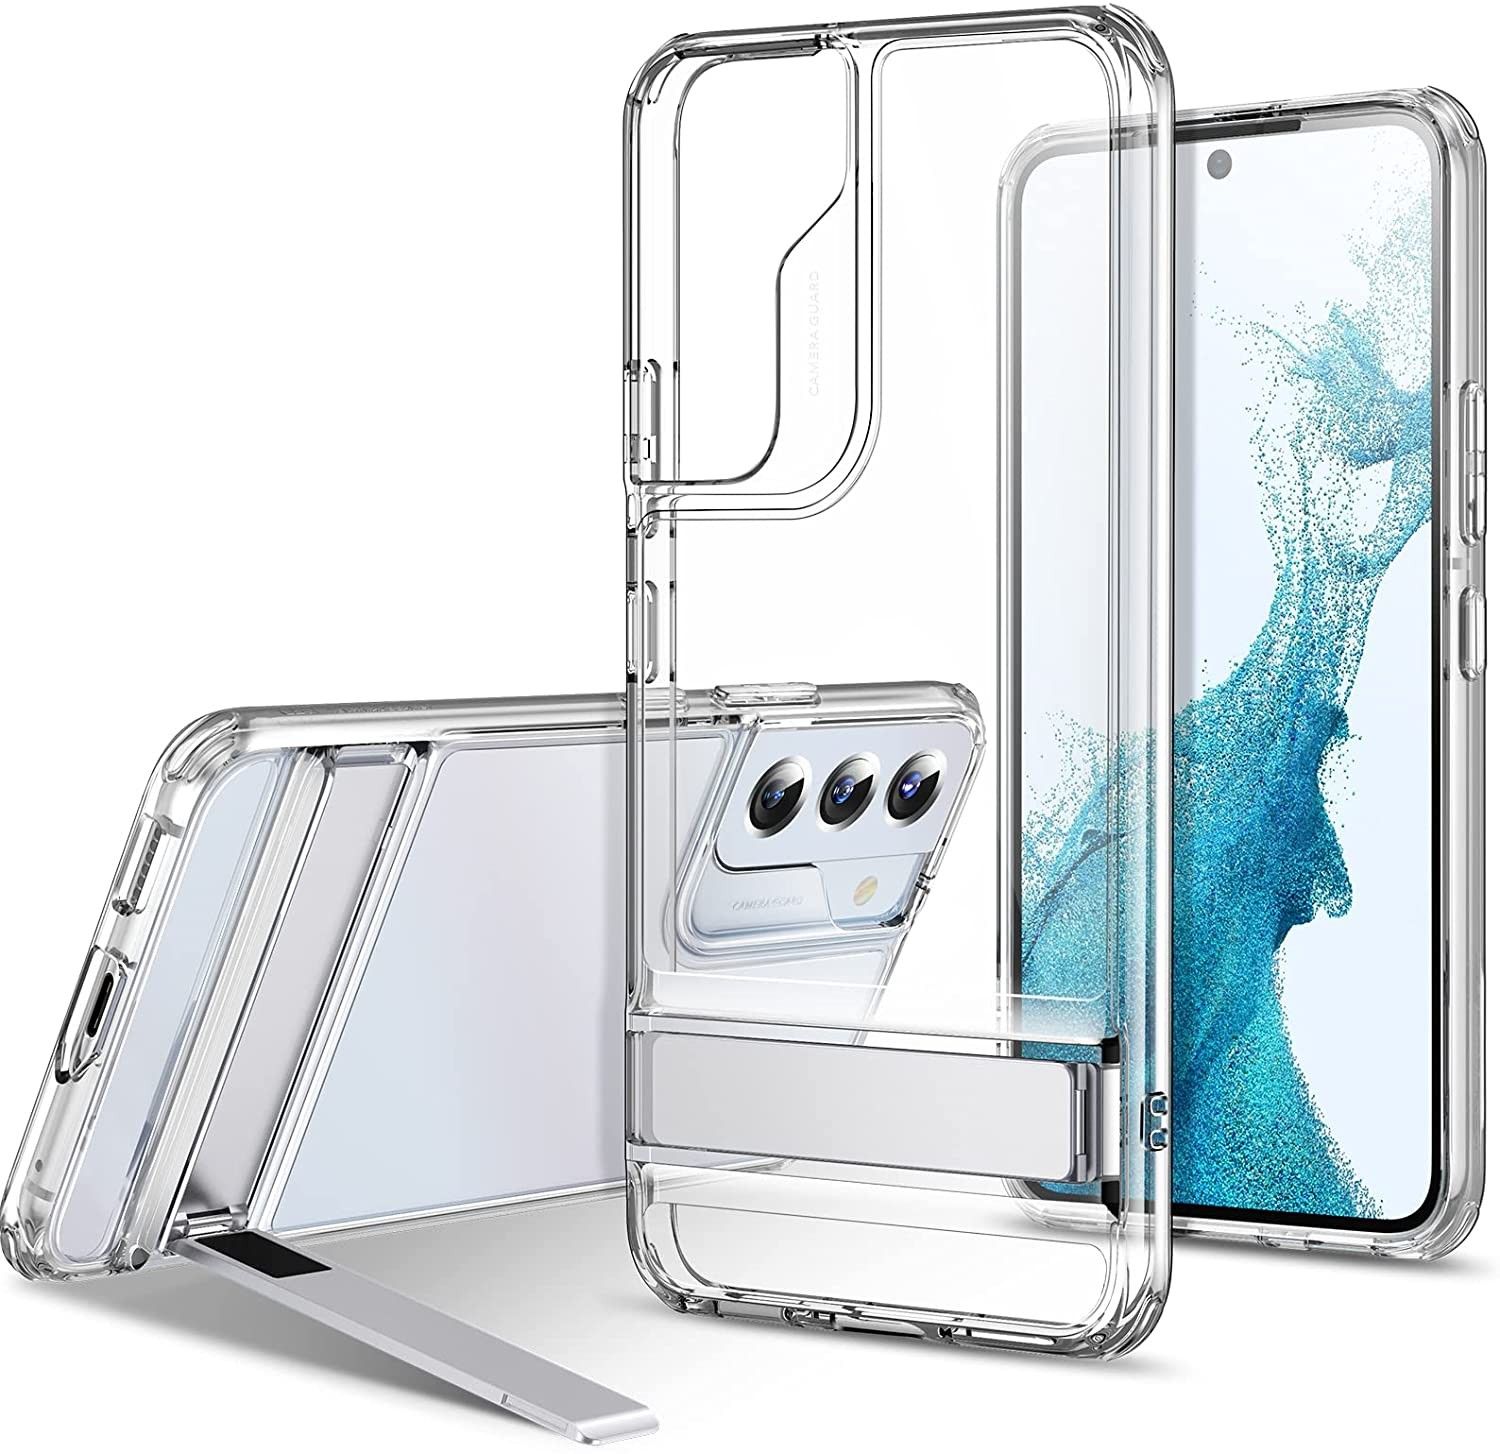 These are the best Galaxy S22 clear cases